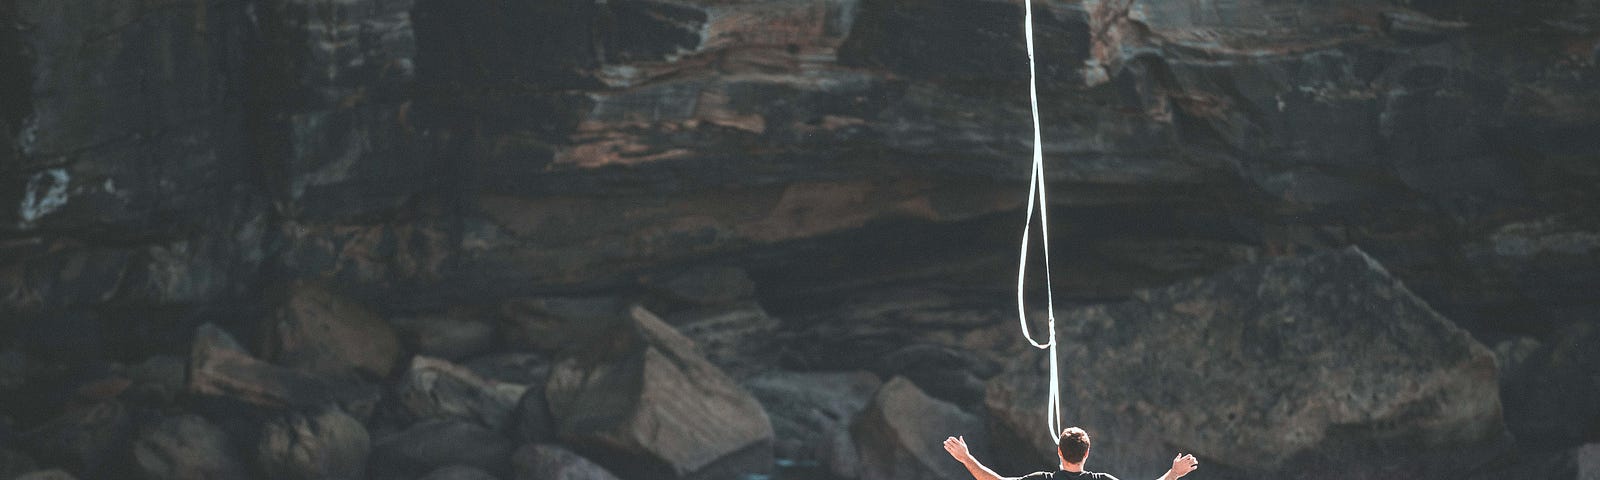 Photo of a free solo slackliner showing the importance of managing risk